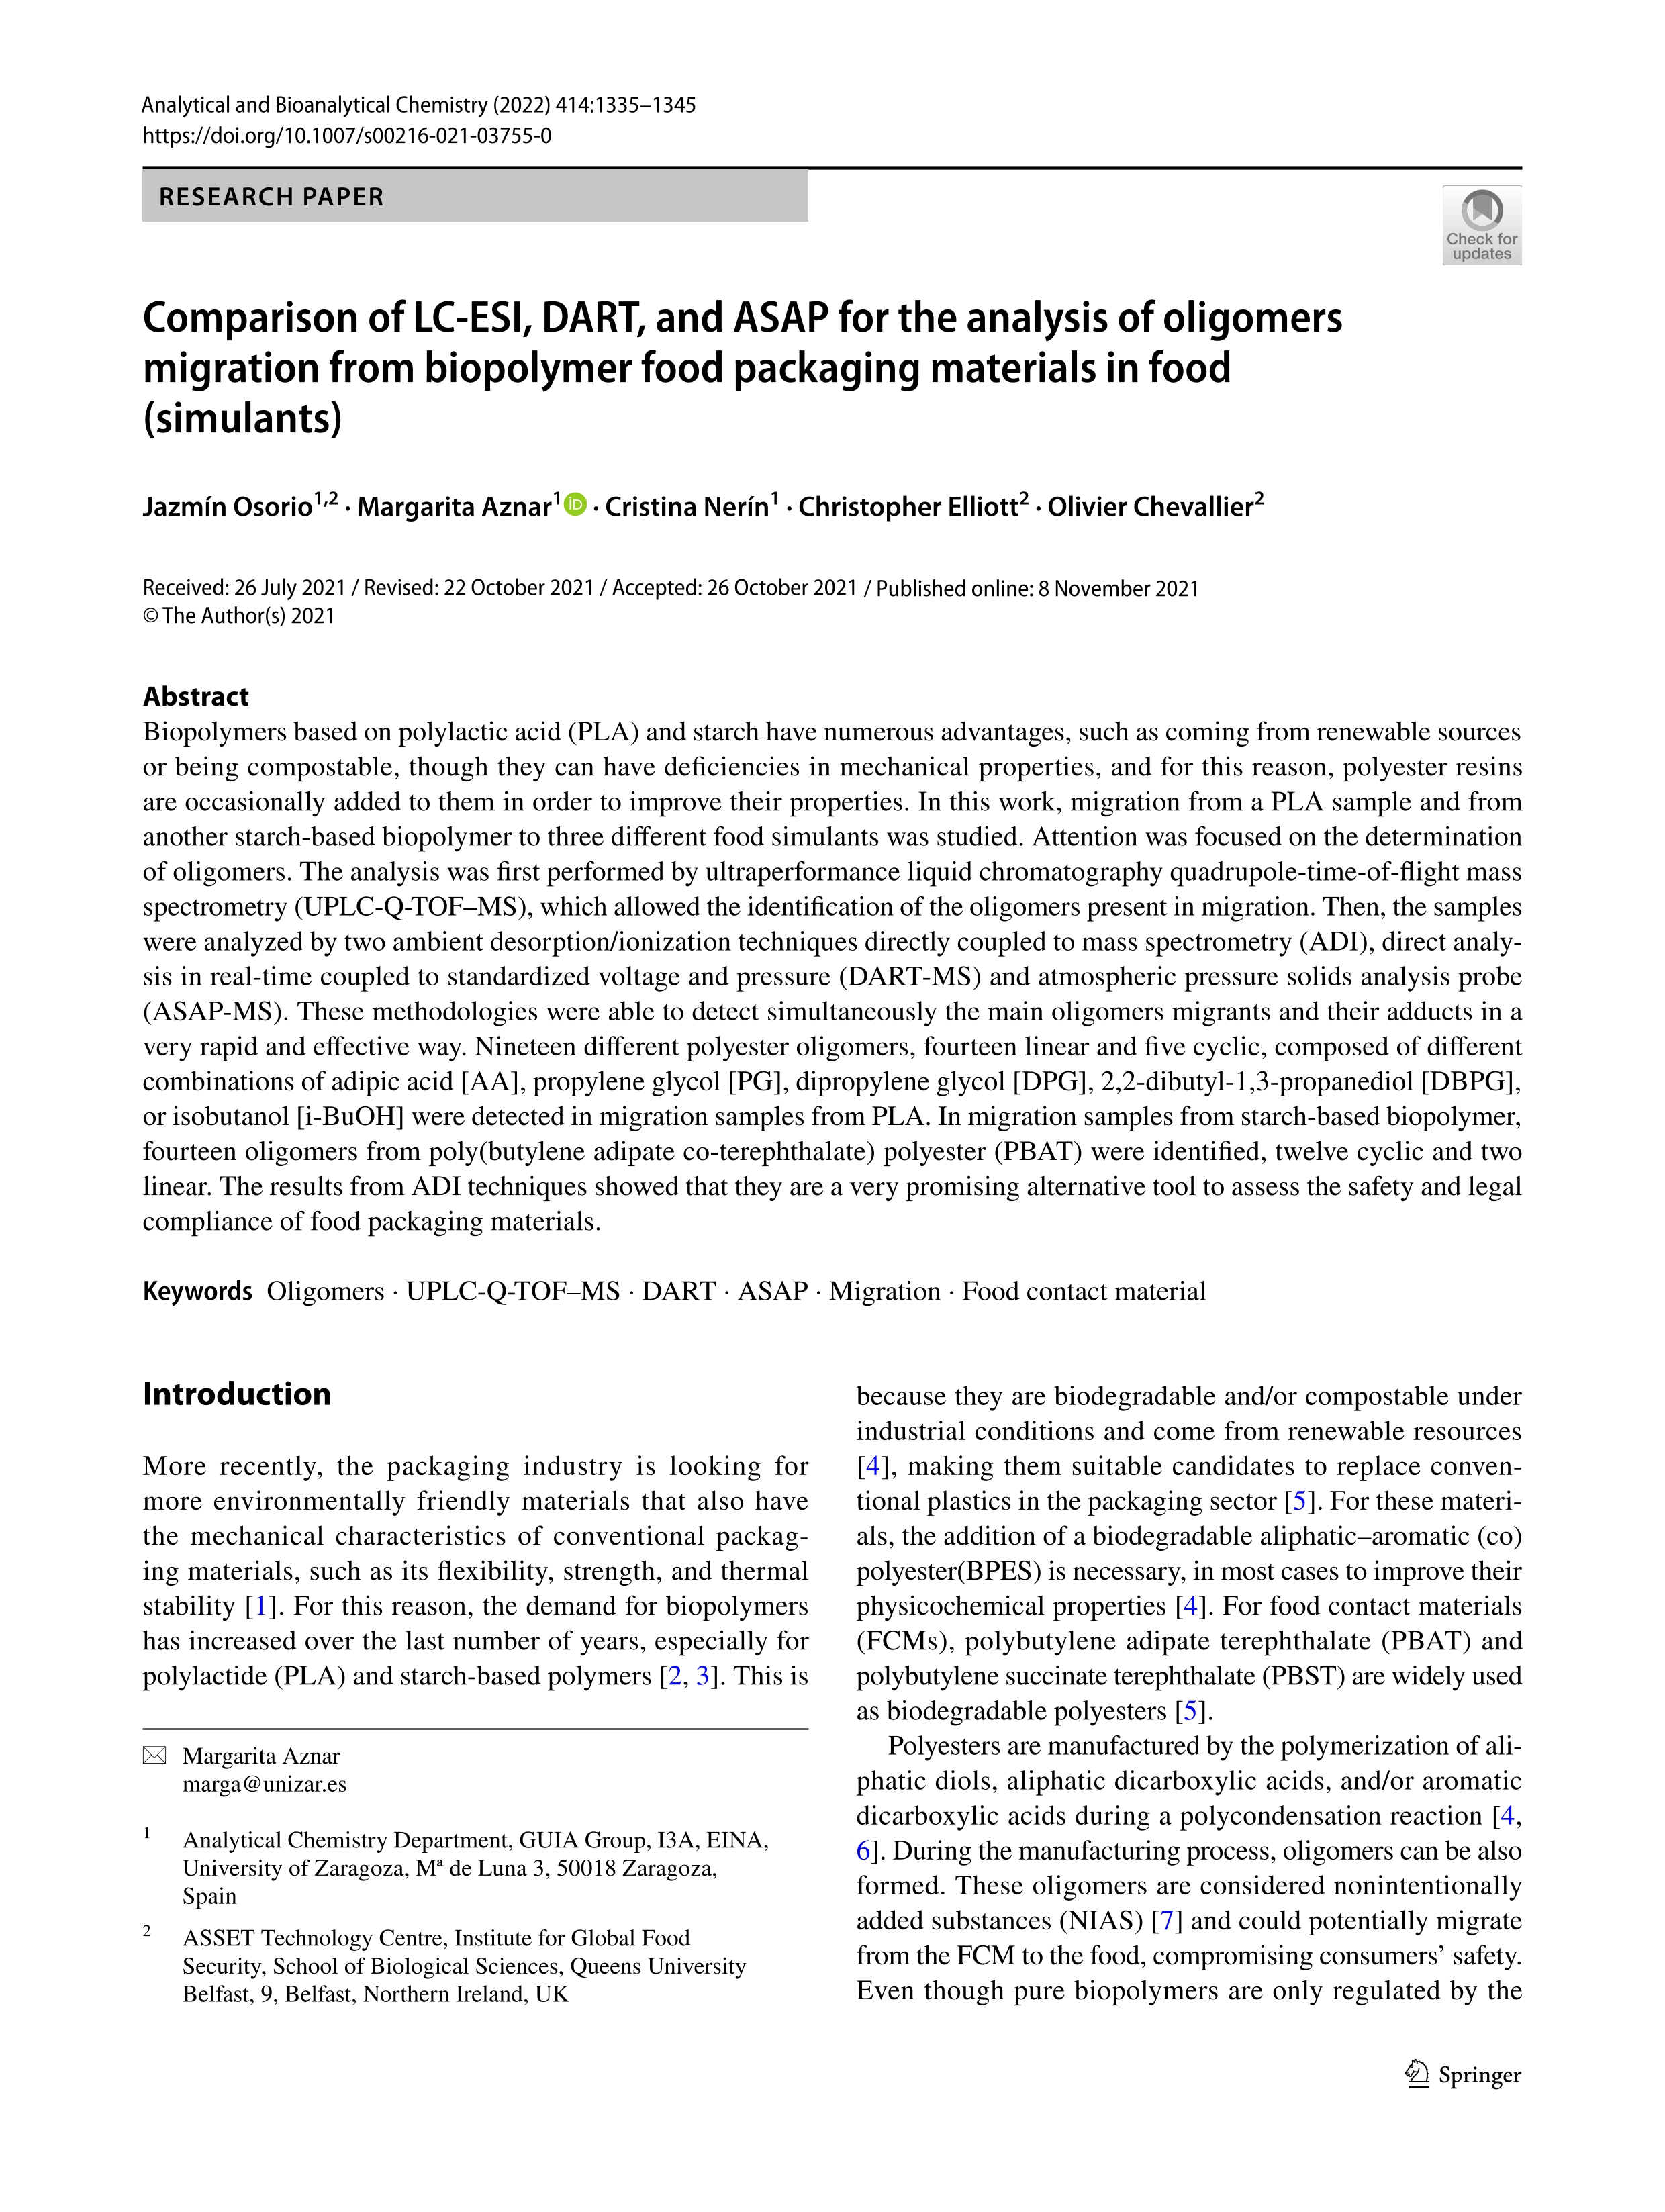 Comparison of LC-ESI, DART, and ASAP for the analysis of oligomers migration from biopolymer food packaging materials in food (simulants)